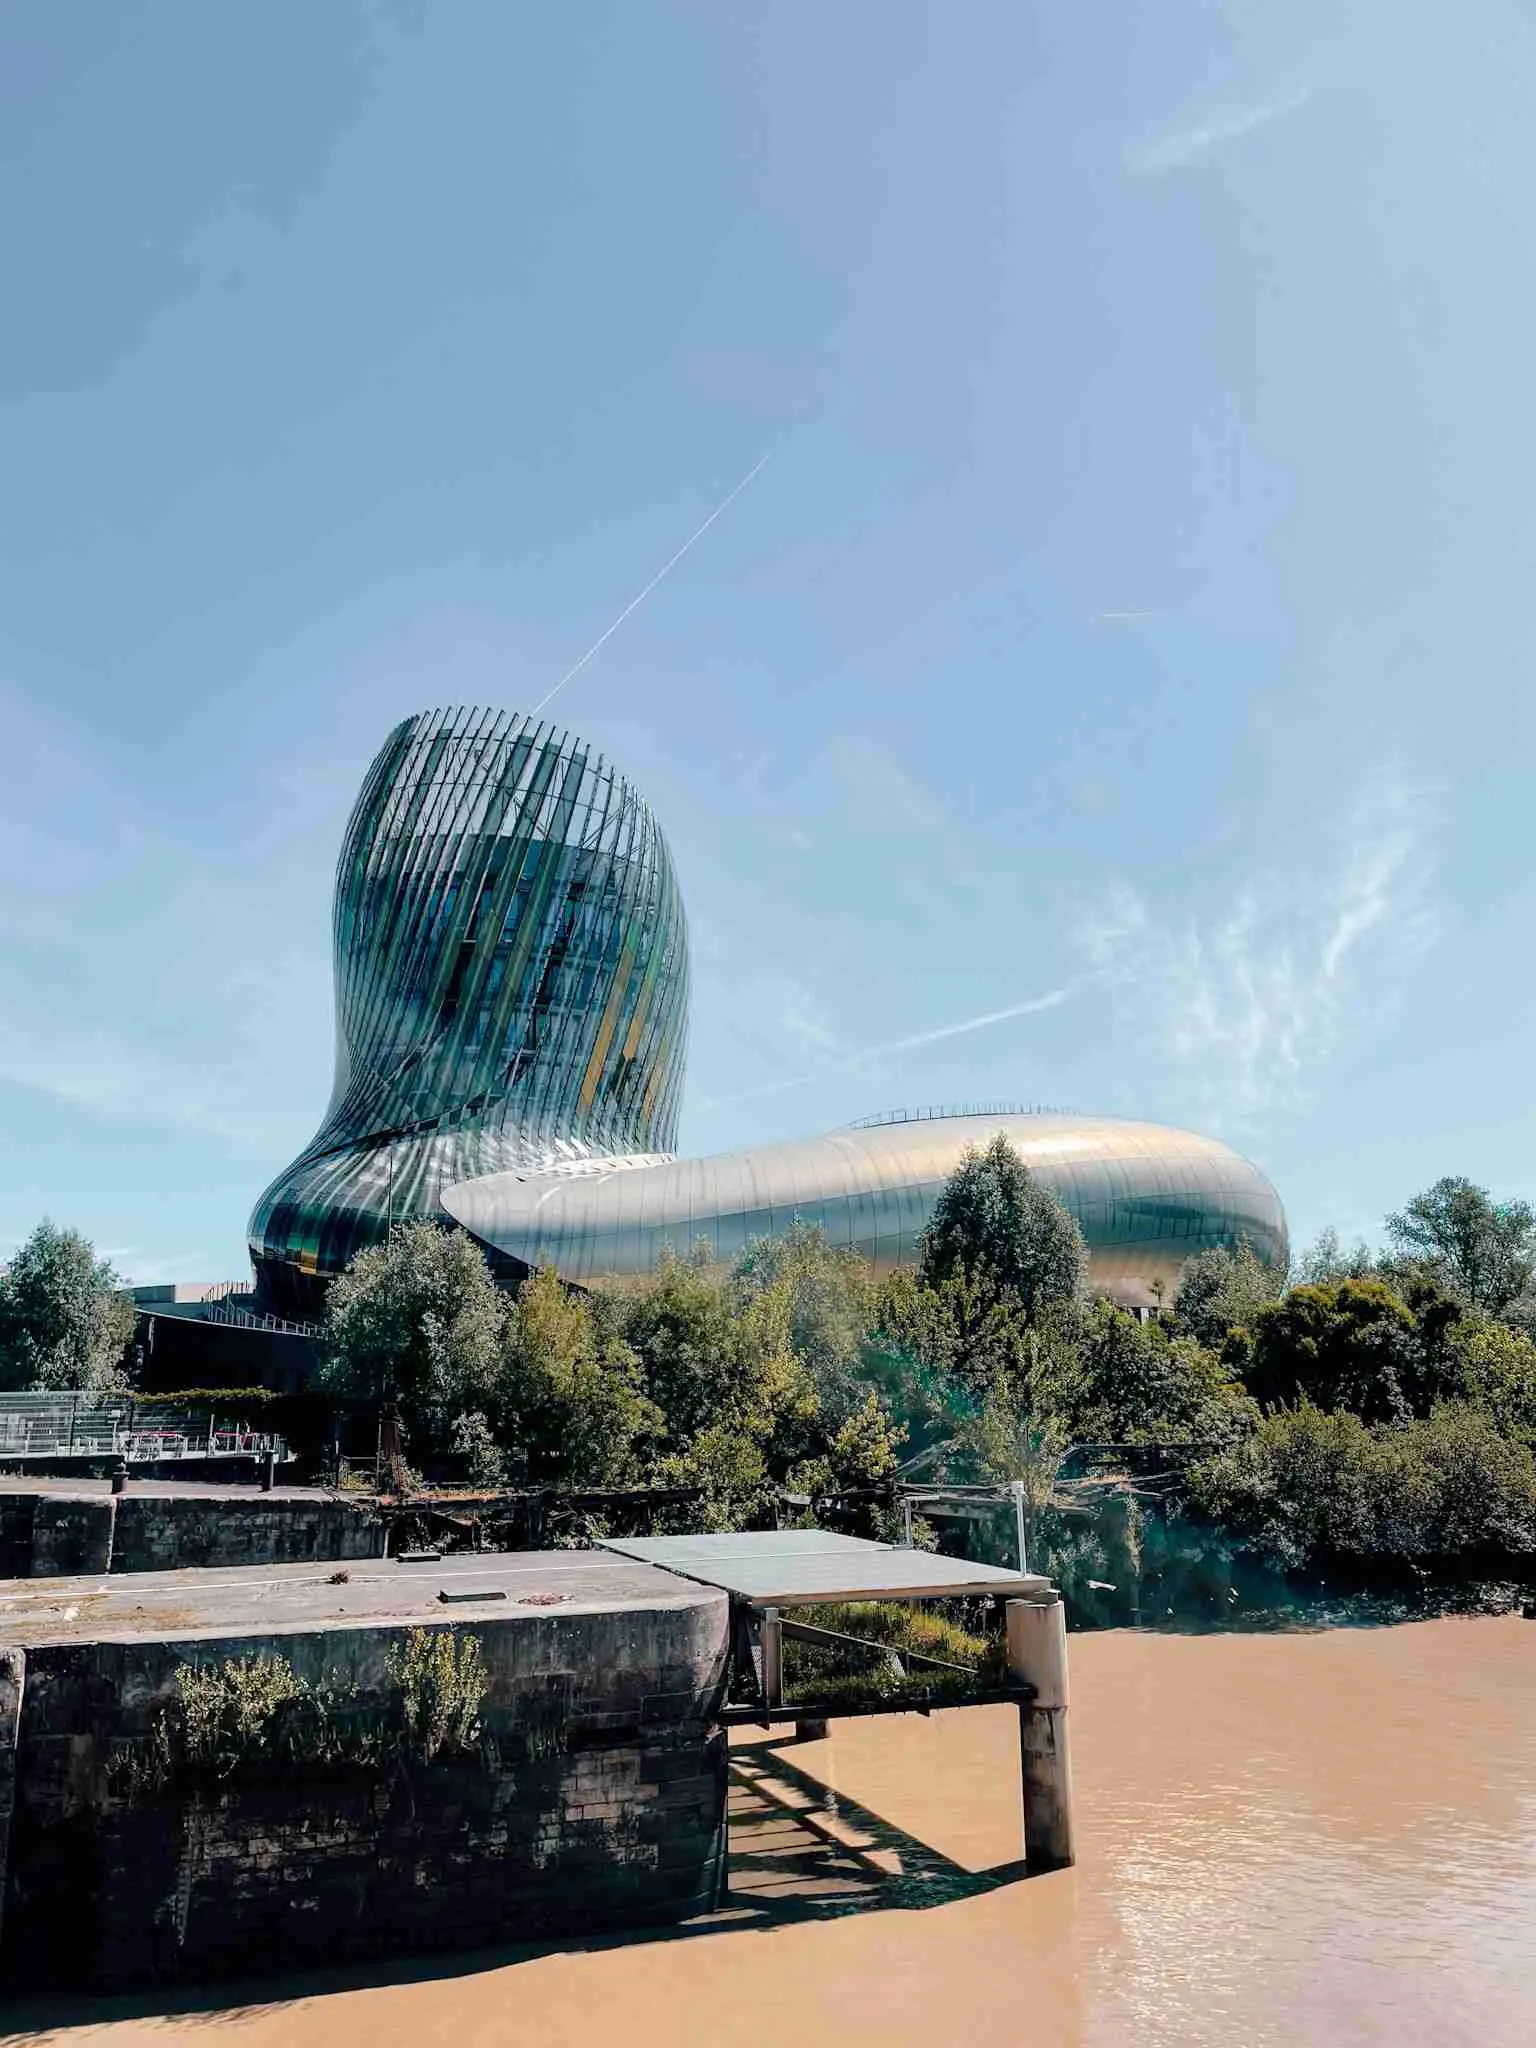 The Cité due Vin is the wine museum in Bordeaux and its one of my top recommendations of things to do in Bordeaux